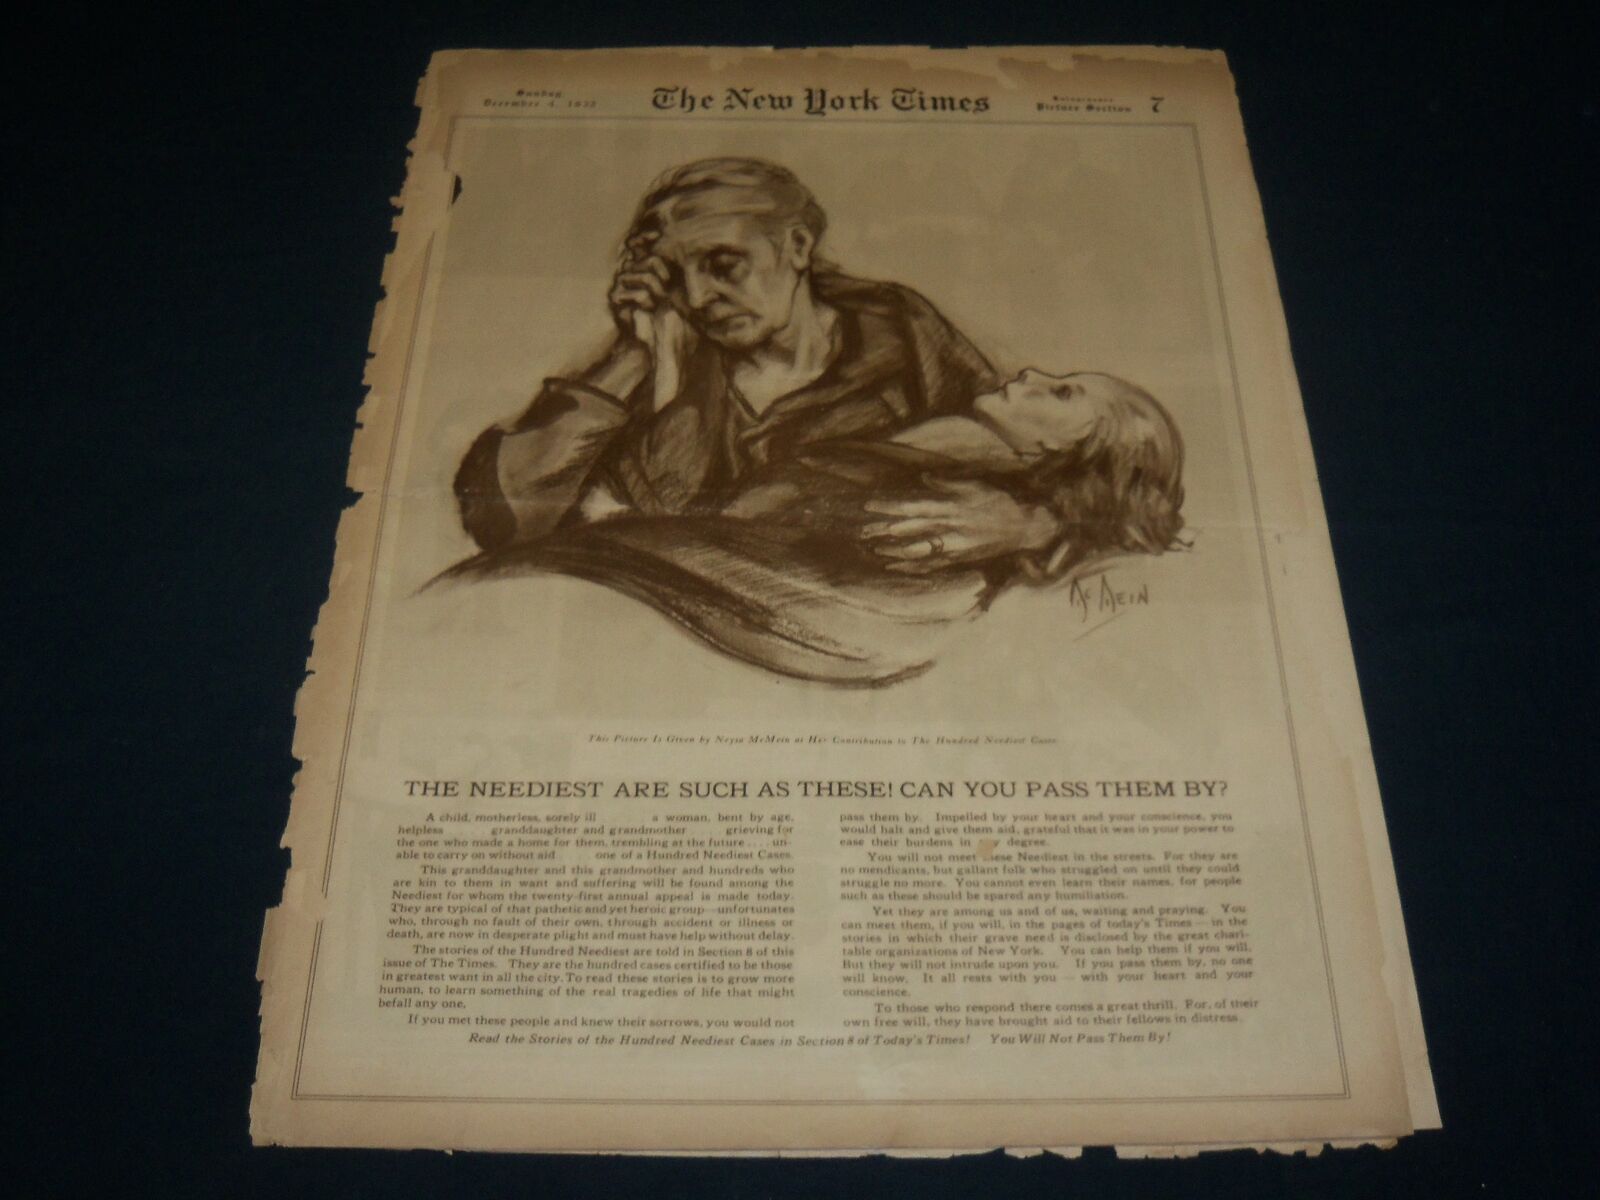 1932 DECEMBER 4 NEW YORK TIMES ROTO PICTURE SECTION - NEEDIEST-MCMEIN - NT 9406